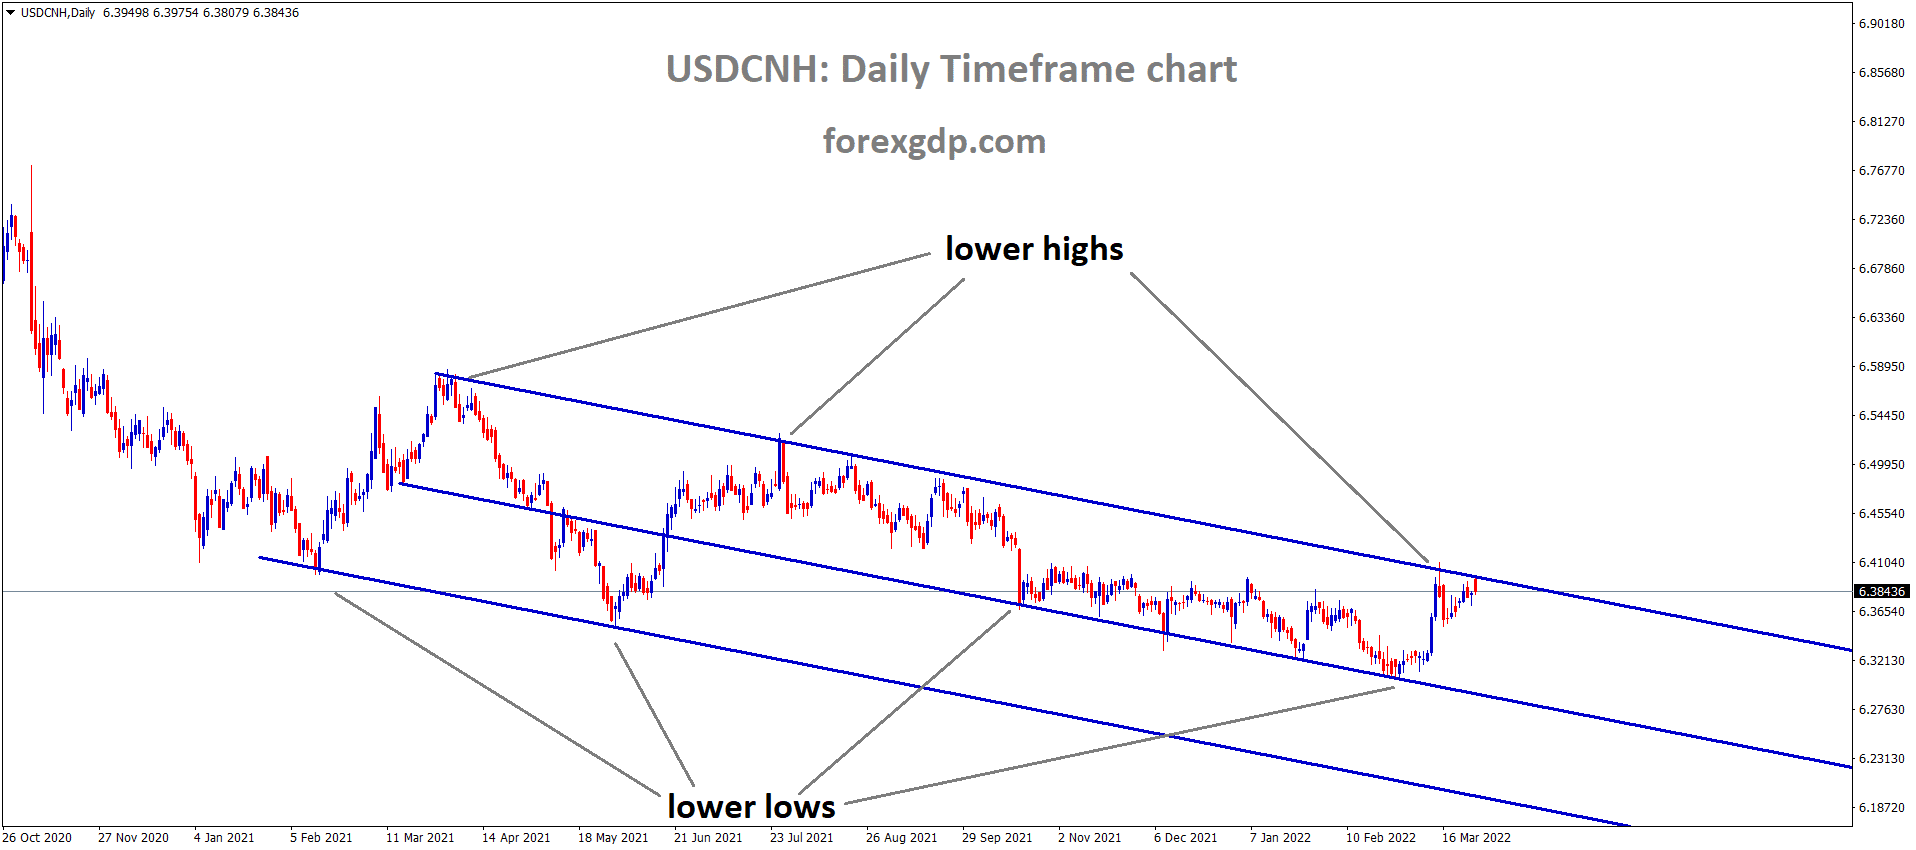 USDCNH Daily Time Frame Market has reached the lower high area of the Descending channel Pattern